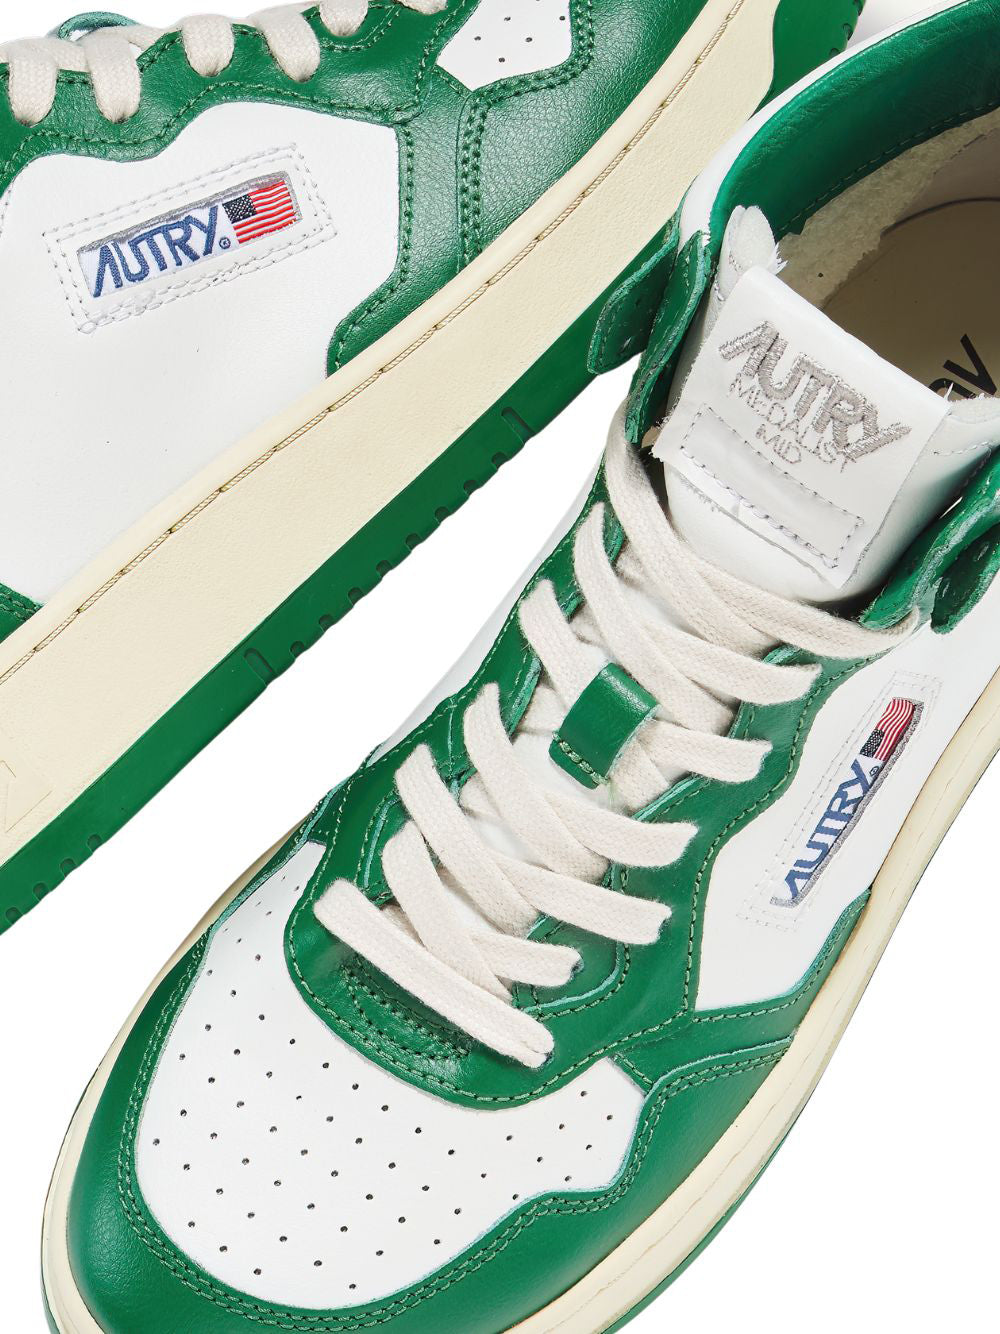 Medalist Mid Sneakers In Two-Tone Leather (White And Green) (Women)